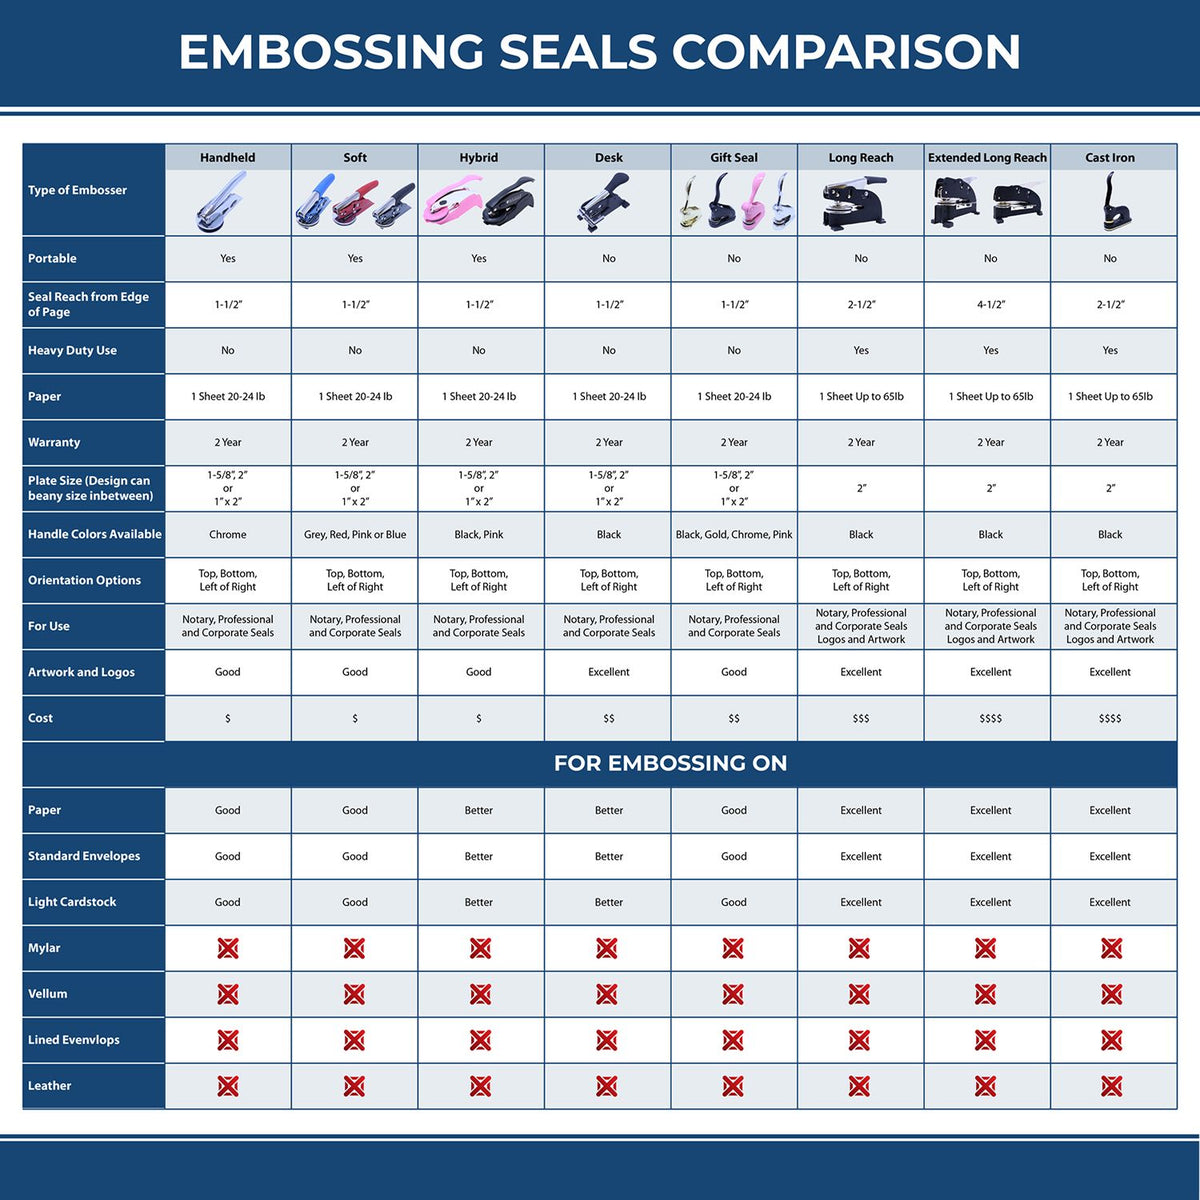 A comparison chart for the different types of mount models available for the Heavy Duty Cast Iron Mississippi Engineer Seal Embosser.